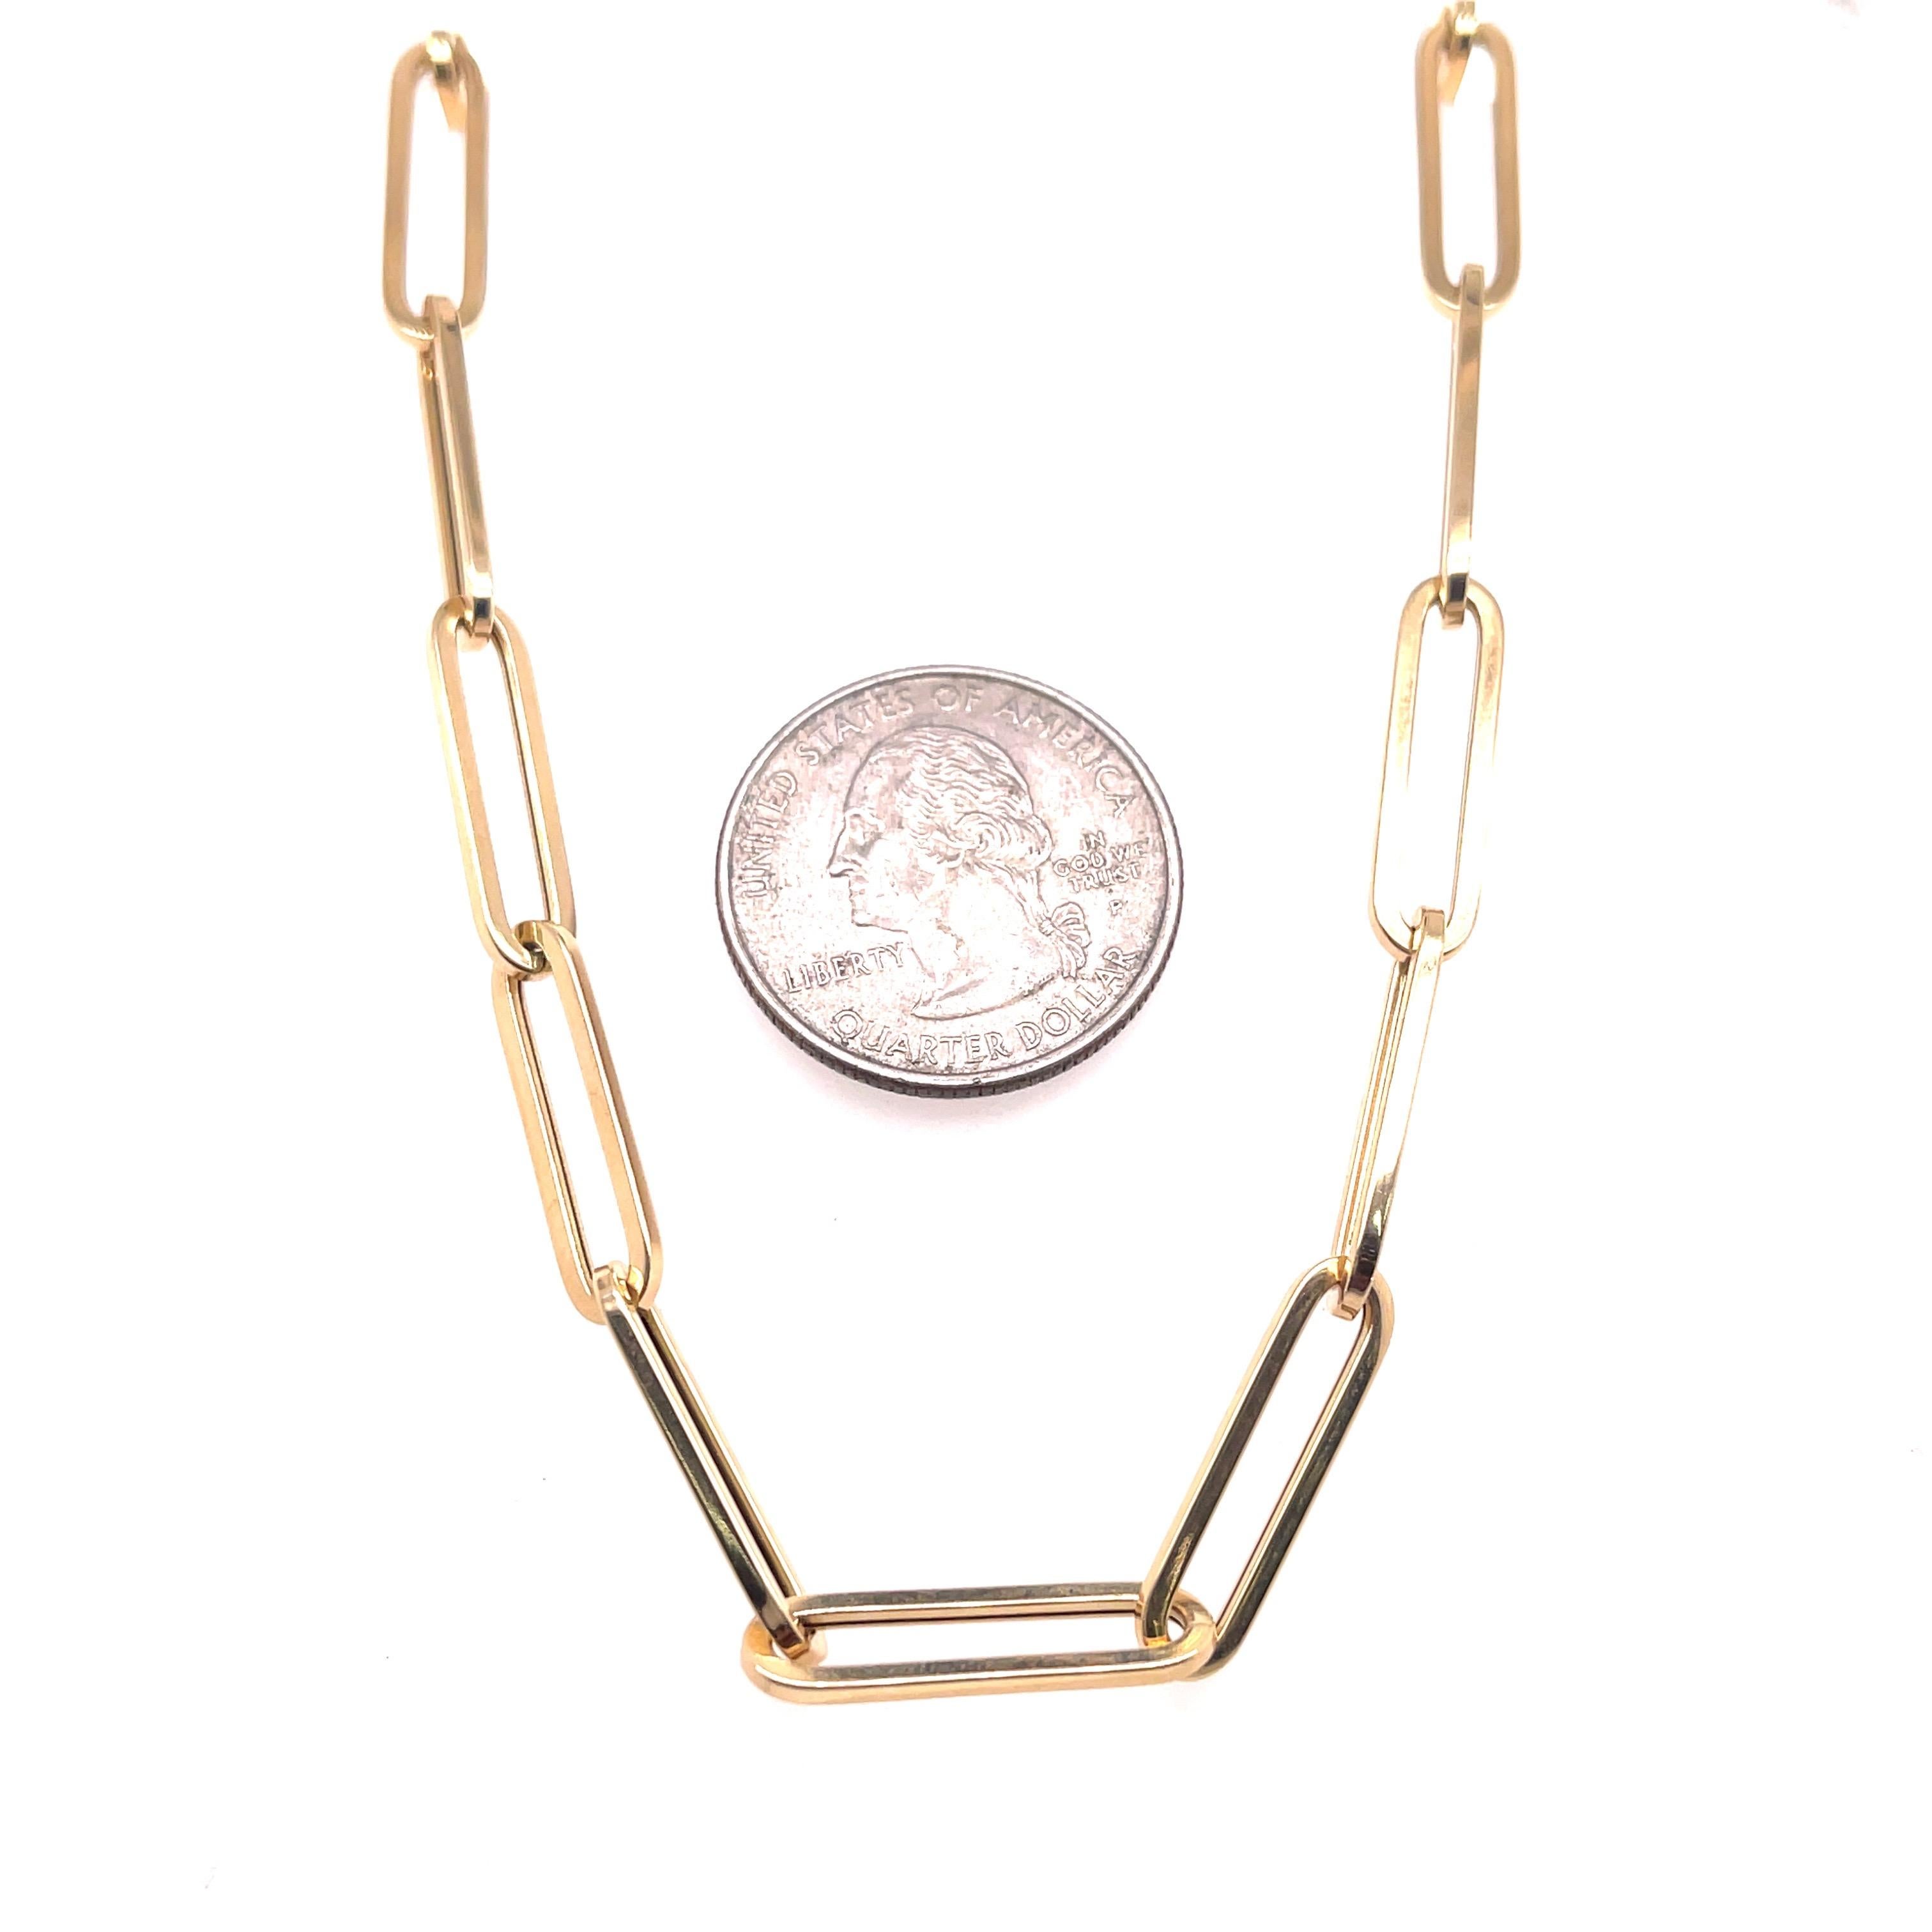 Gold paperclip Necklace 9.65 g.
16